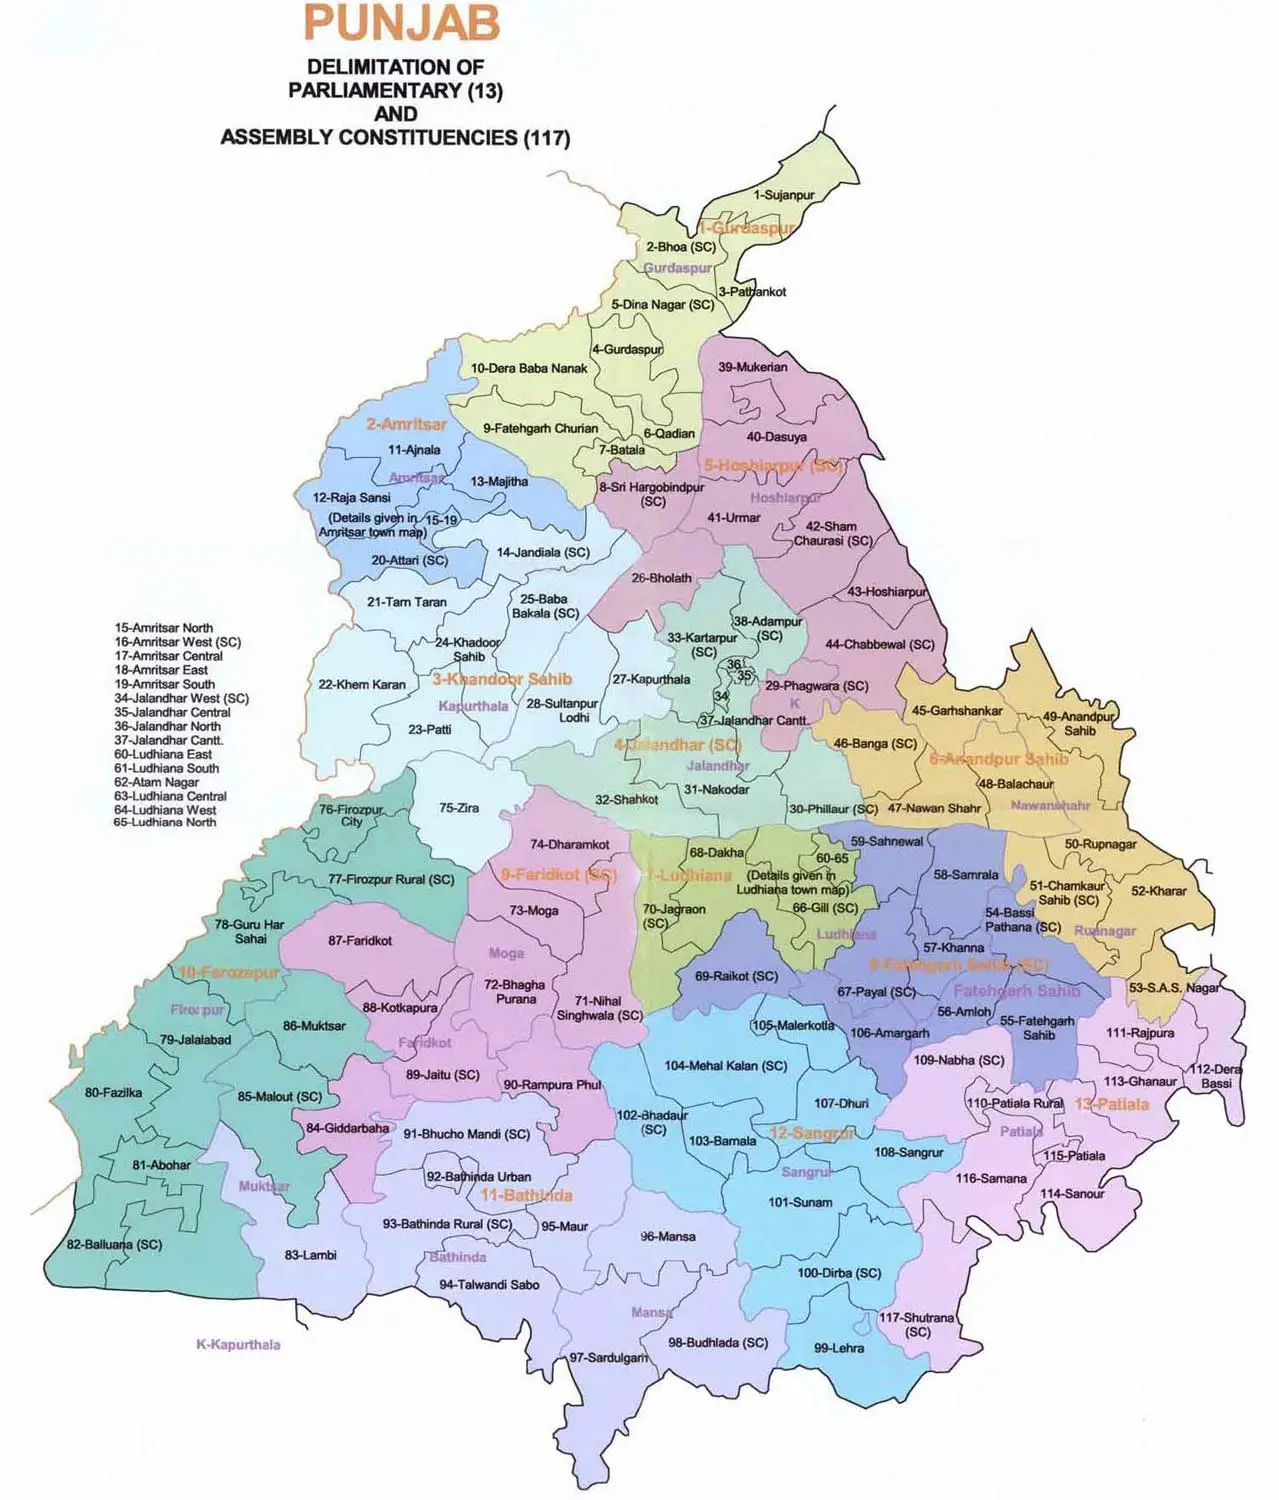 Map Of Punjab Showing The 36 Districts Of The Provinc - vrogue.co